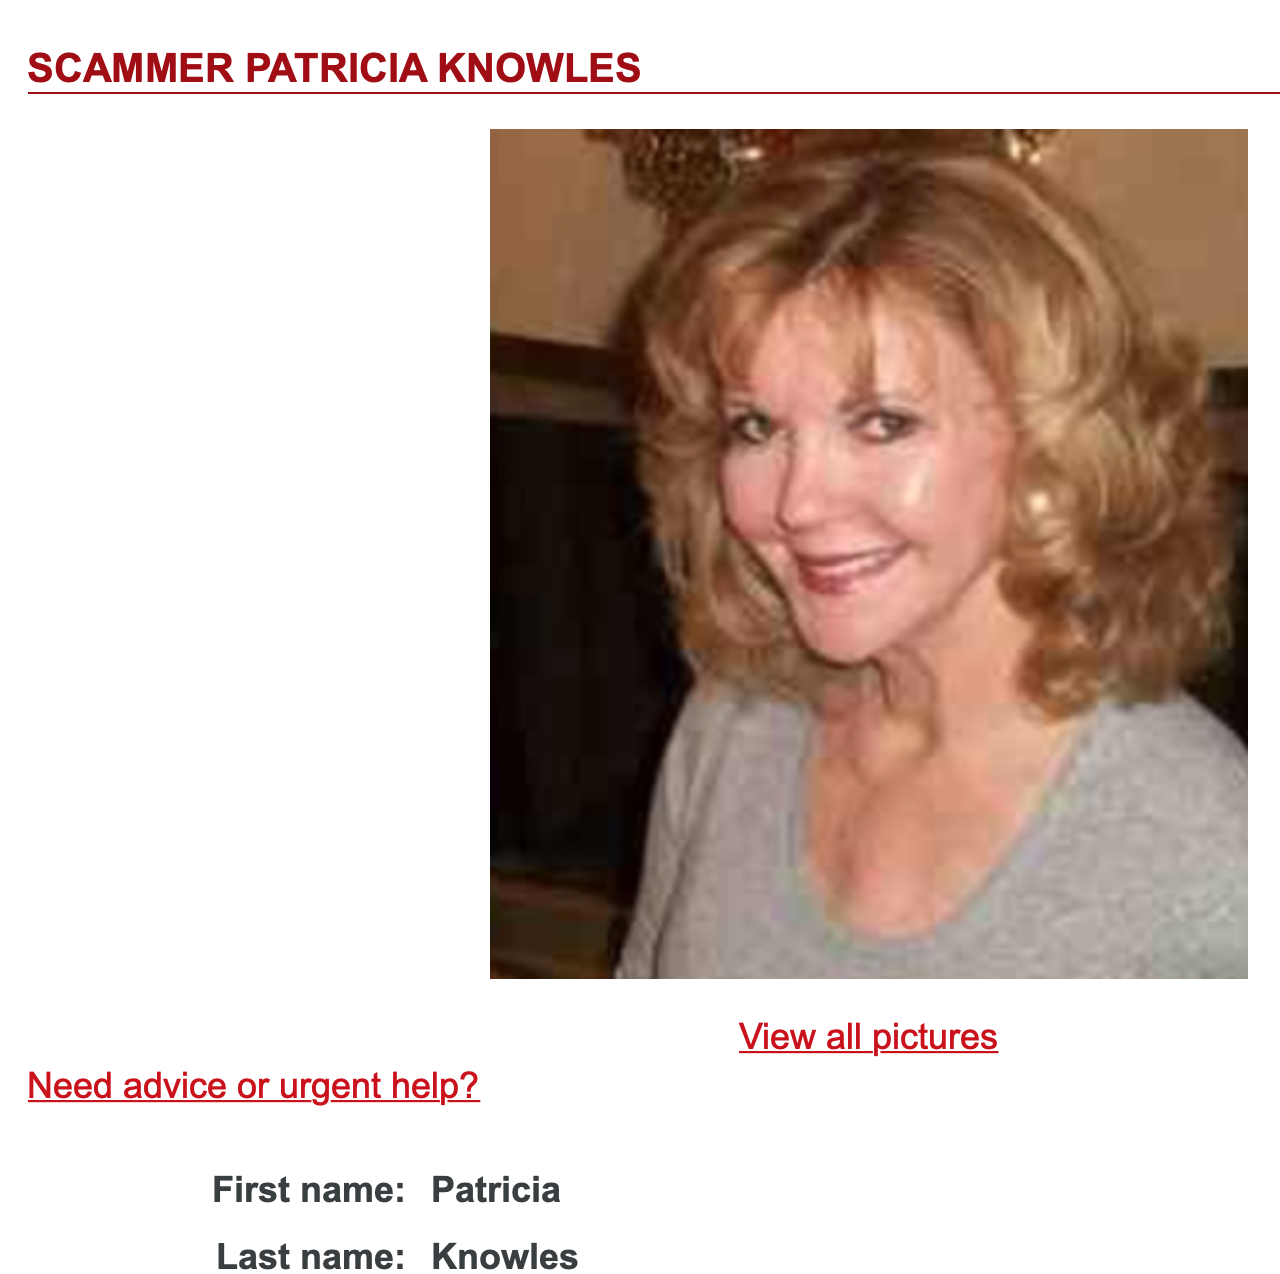 Pat ricia Knowles  -  scammer